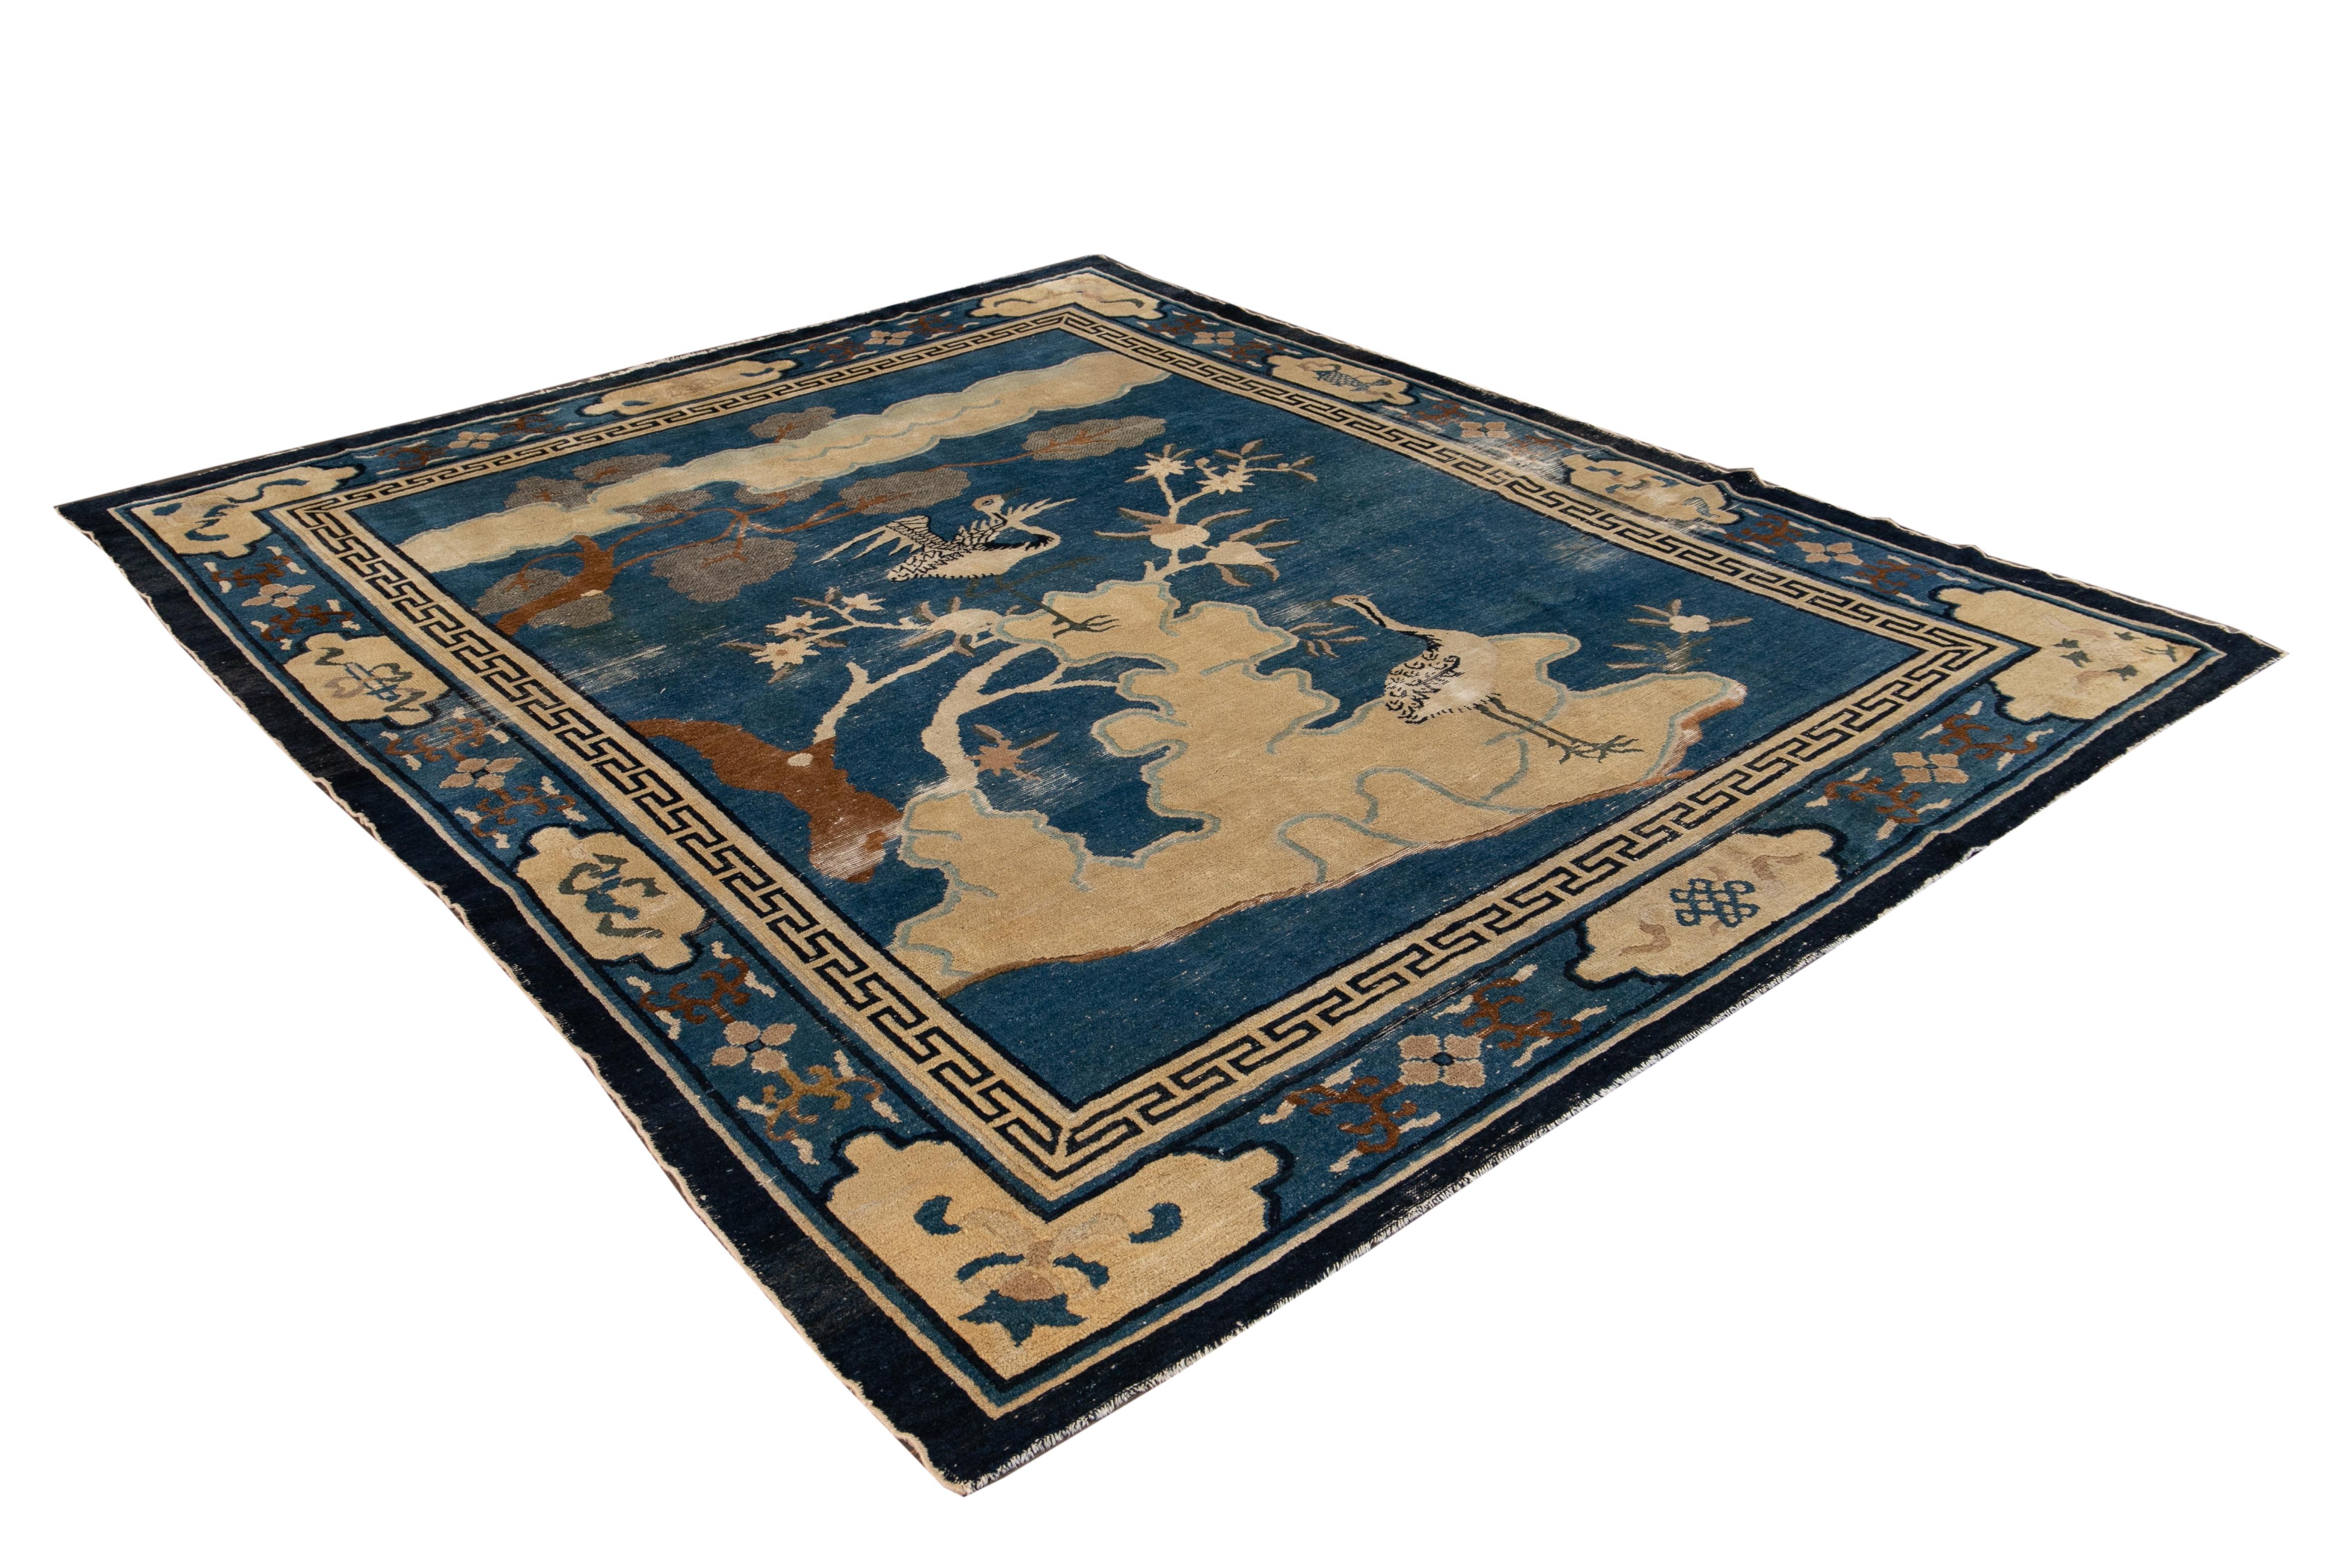 Antique Blue Chinese Peking Bird Design Wool Rug 7 Ft 8 In X 9 Ft 5 In. In Good Condition For Sale In Norwalk, CT